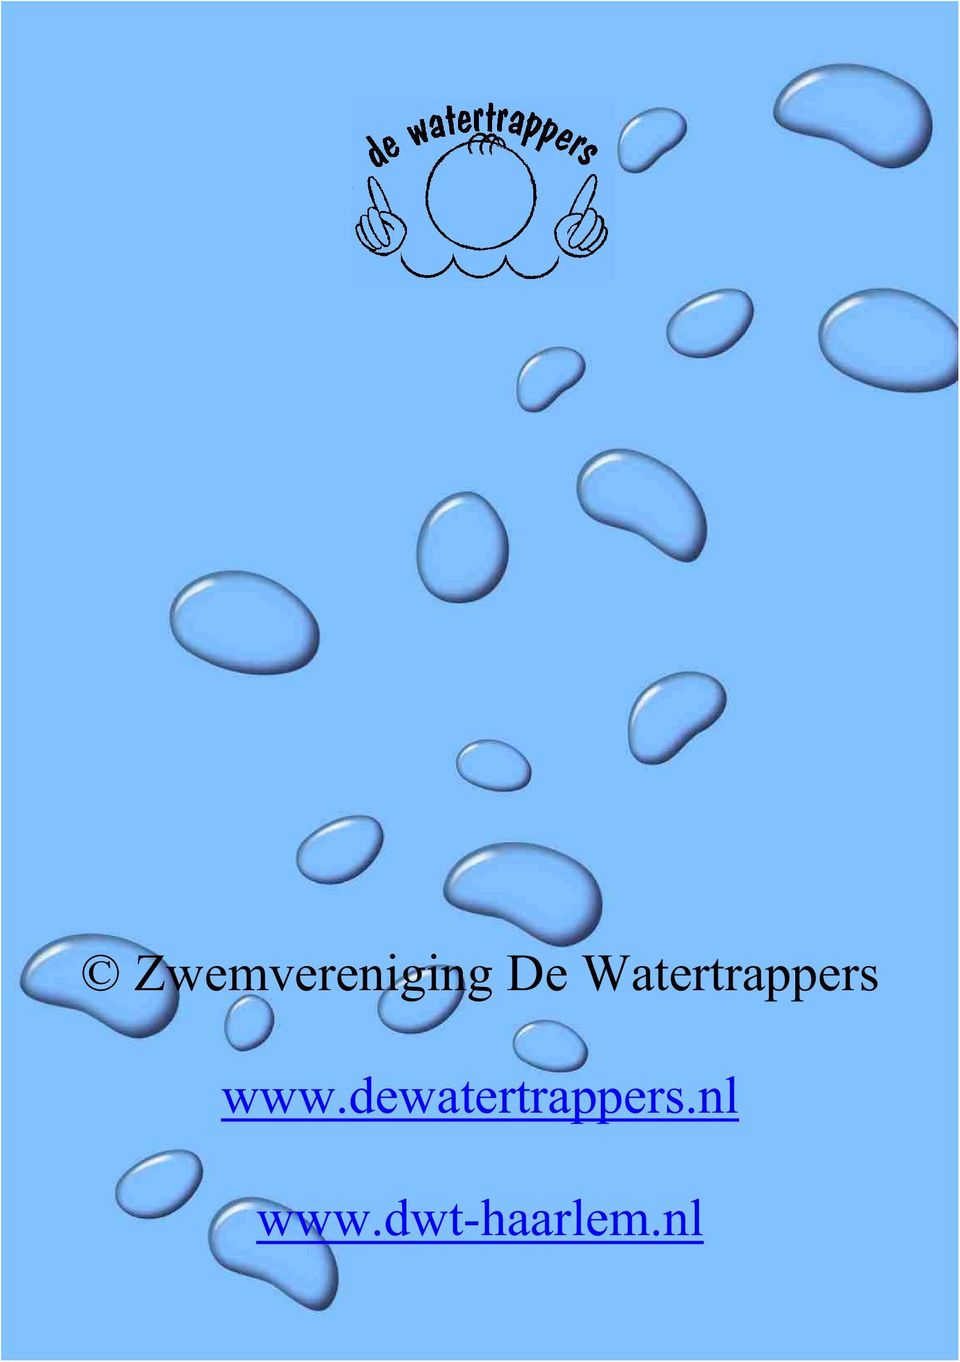 dewatertrappers.